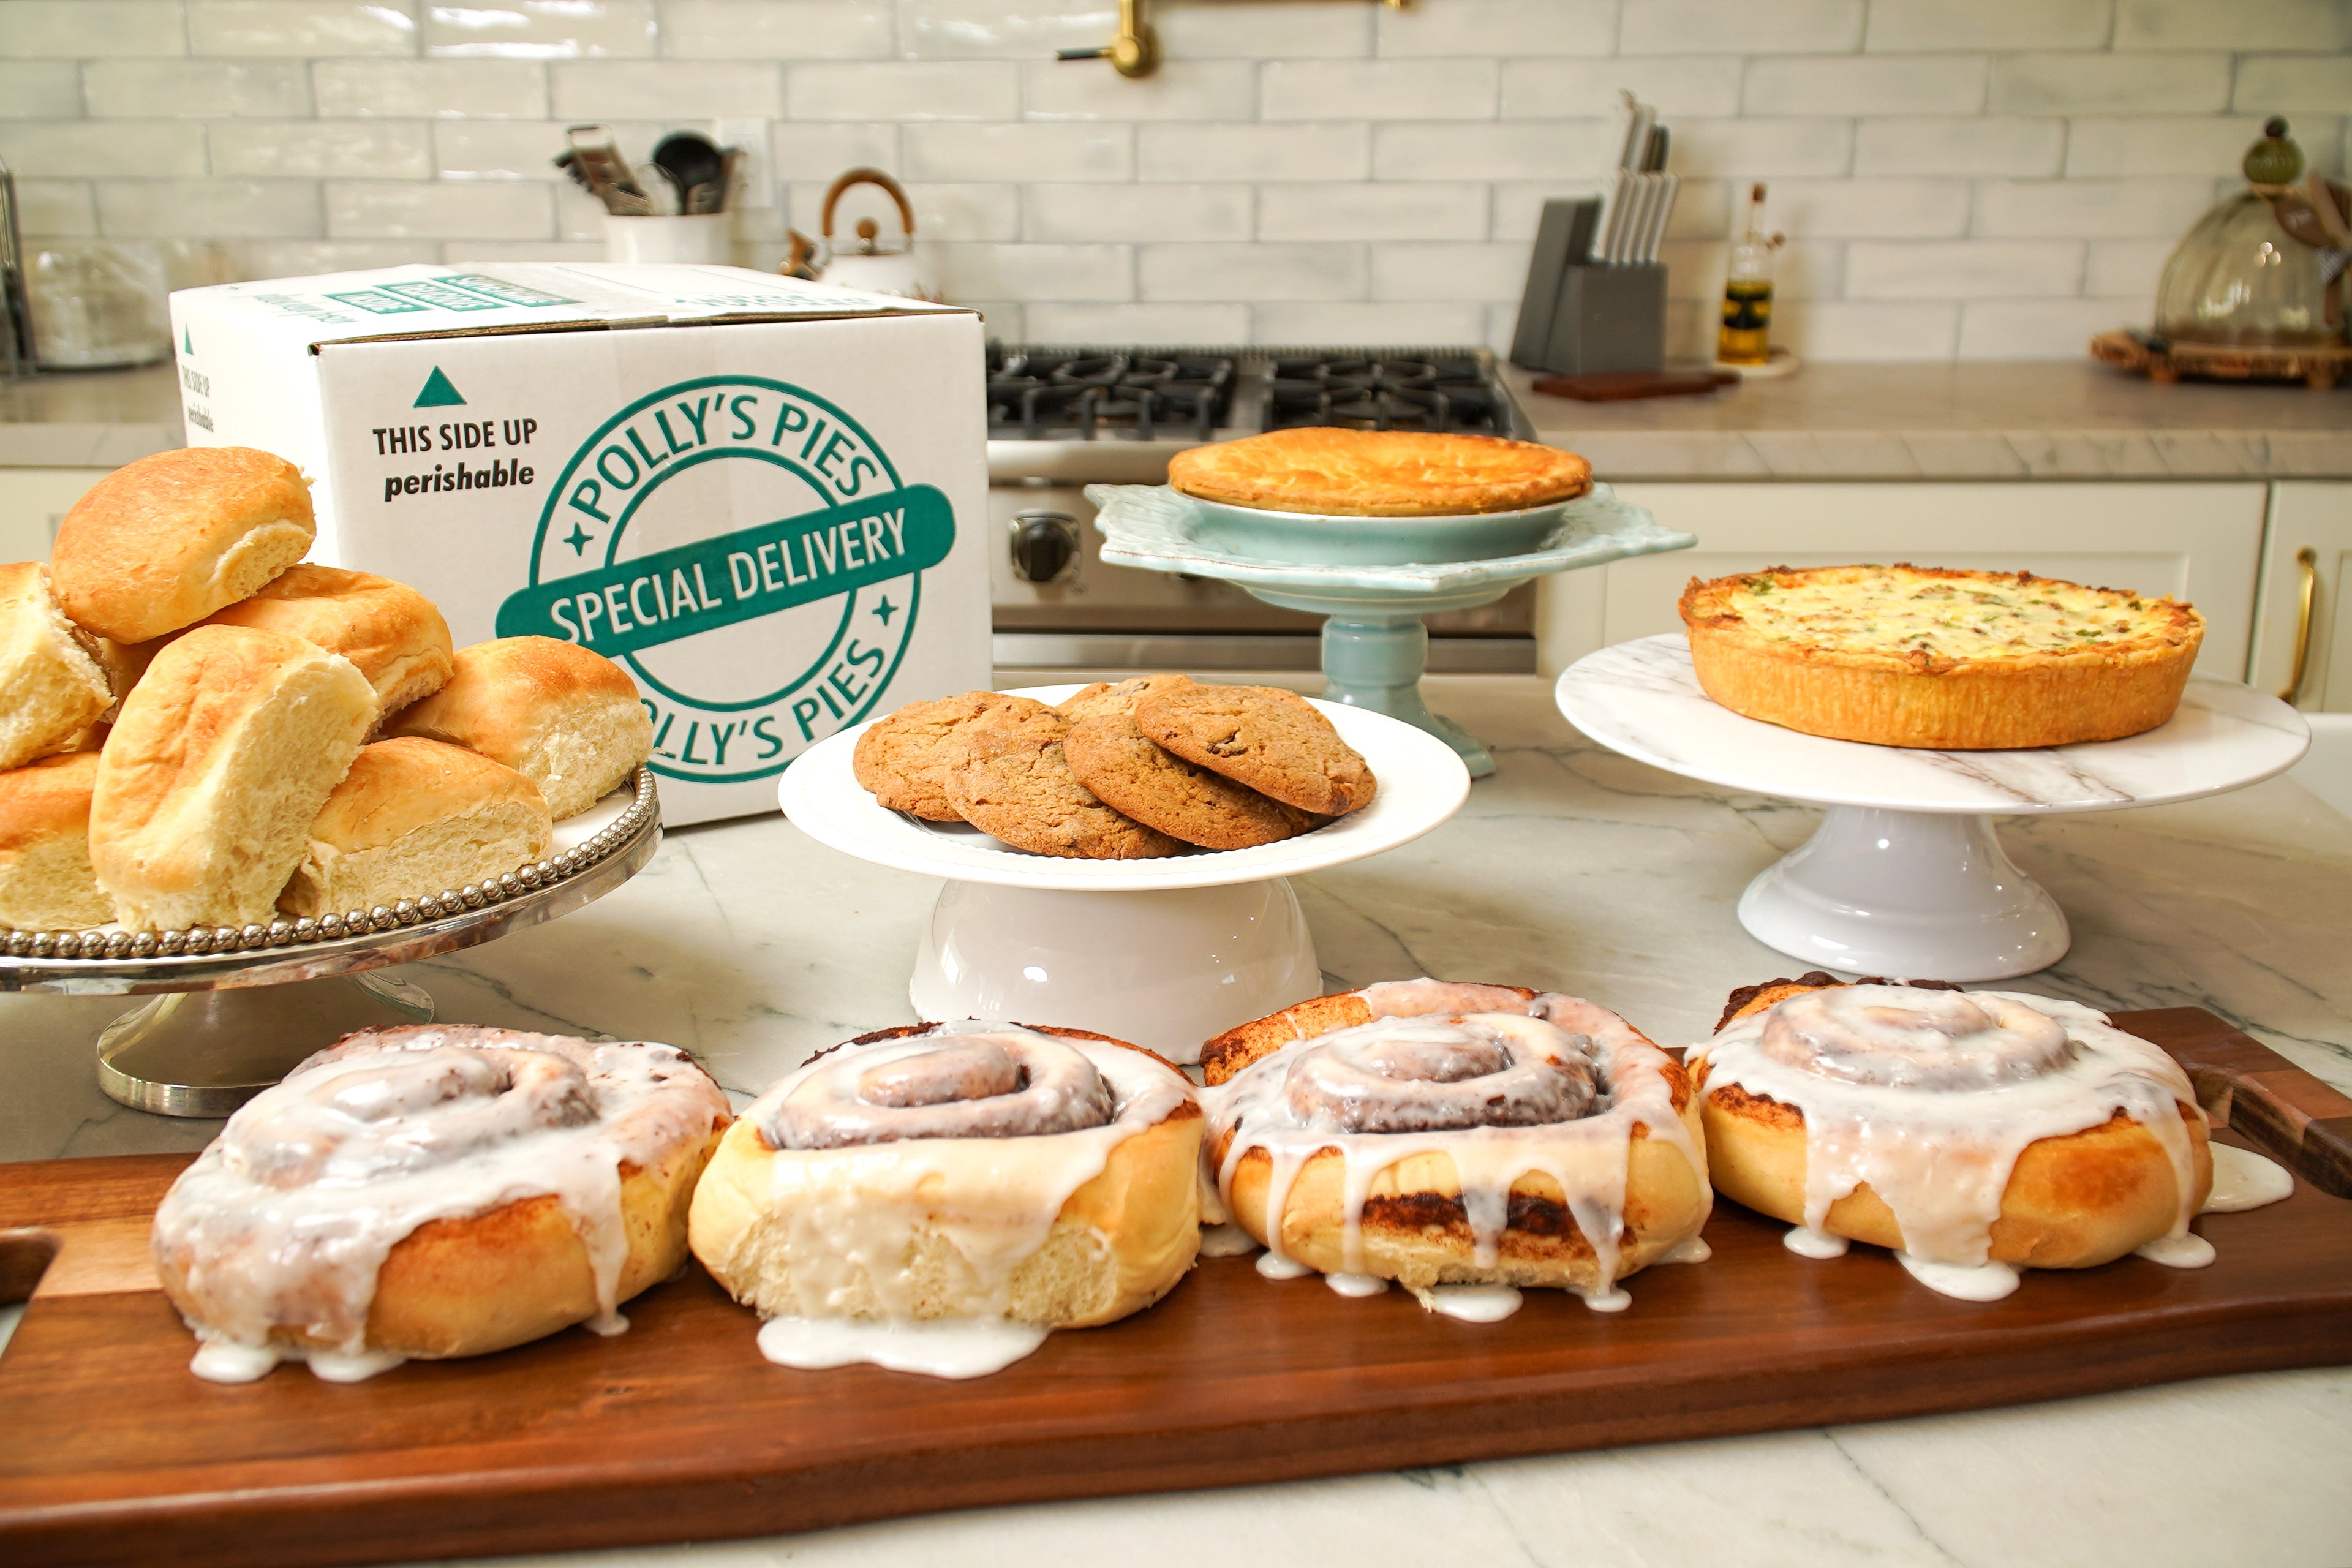 Polly's Pies cinnamon rolls, dinner rolls, cookies, quiche, pie, and delivery box sitting on a marble kitchen countertop in a white kitchen.